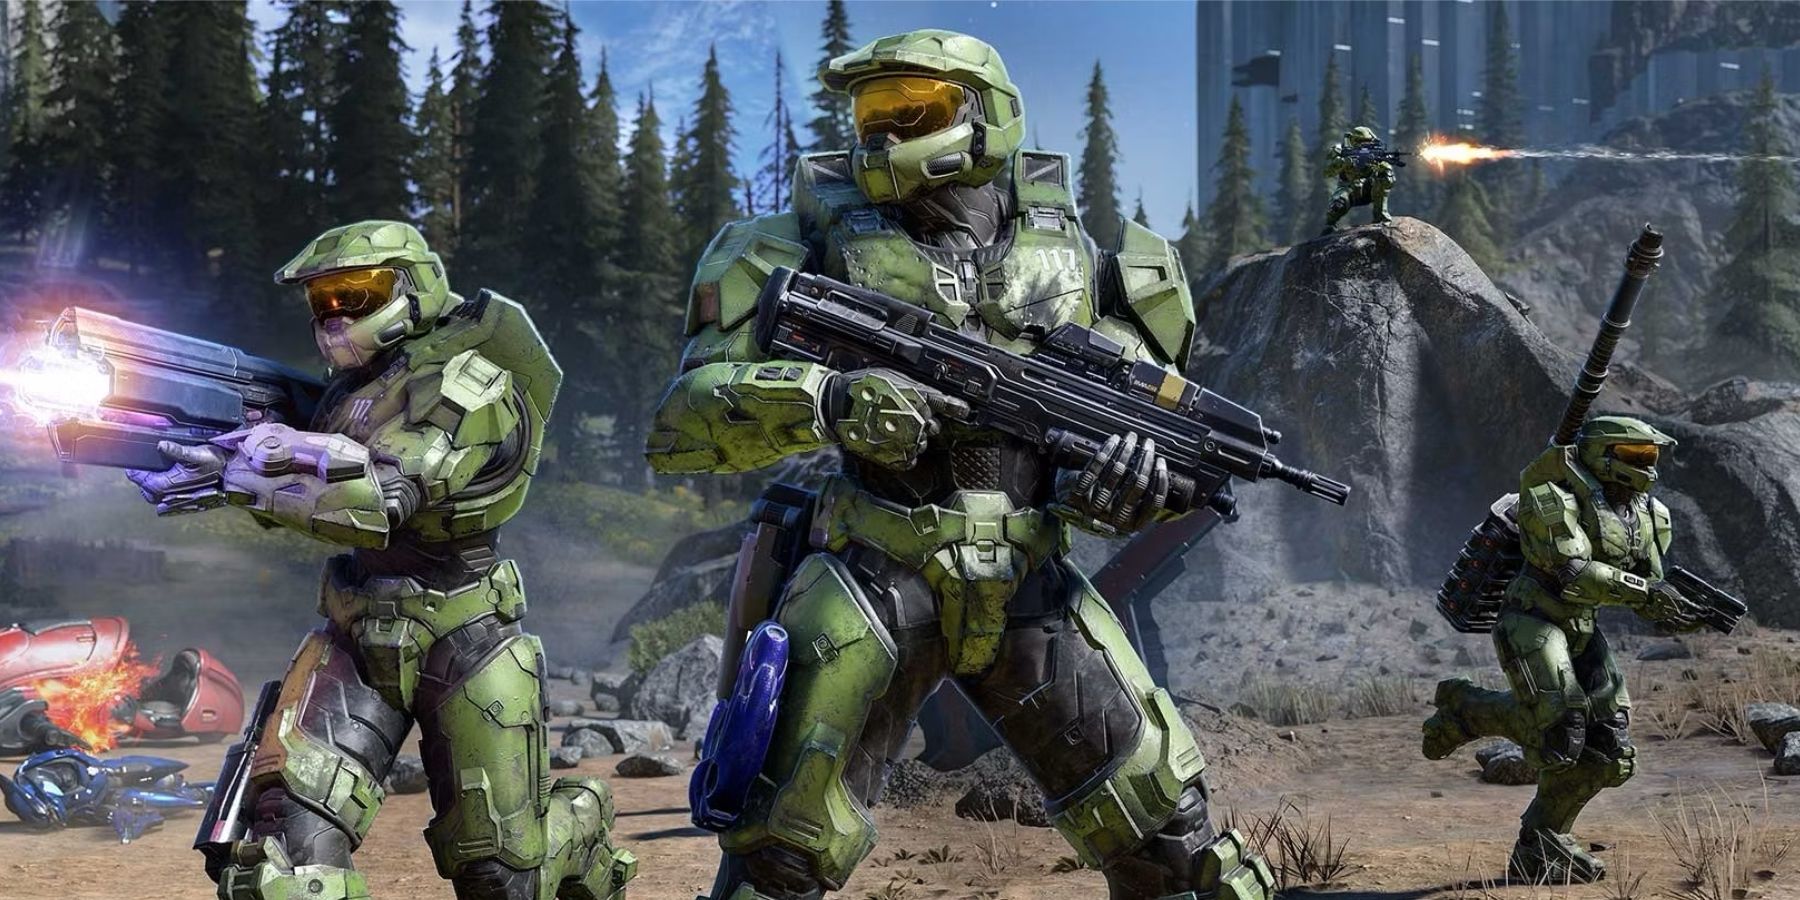 Epic Halo Infinite Clip Features a 'Lore-Accurate Spartan' Moment